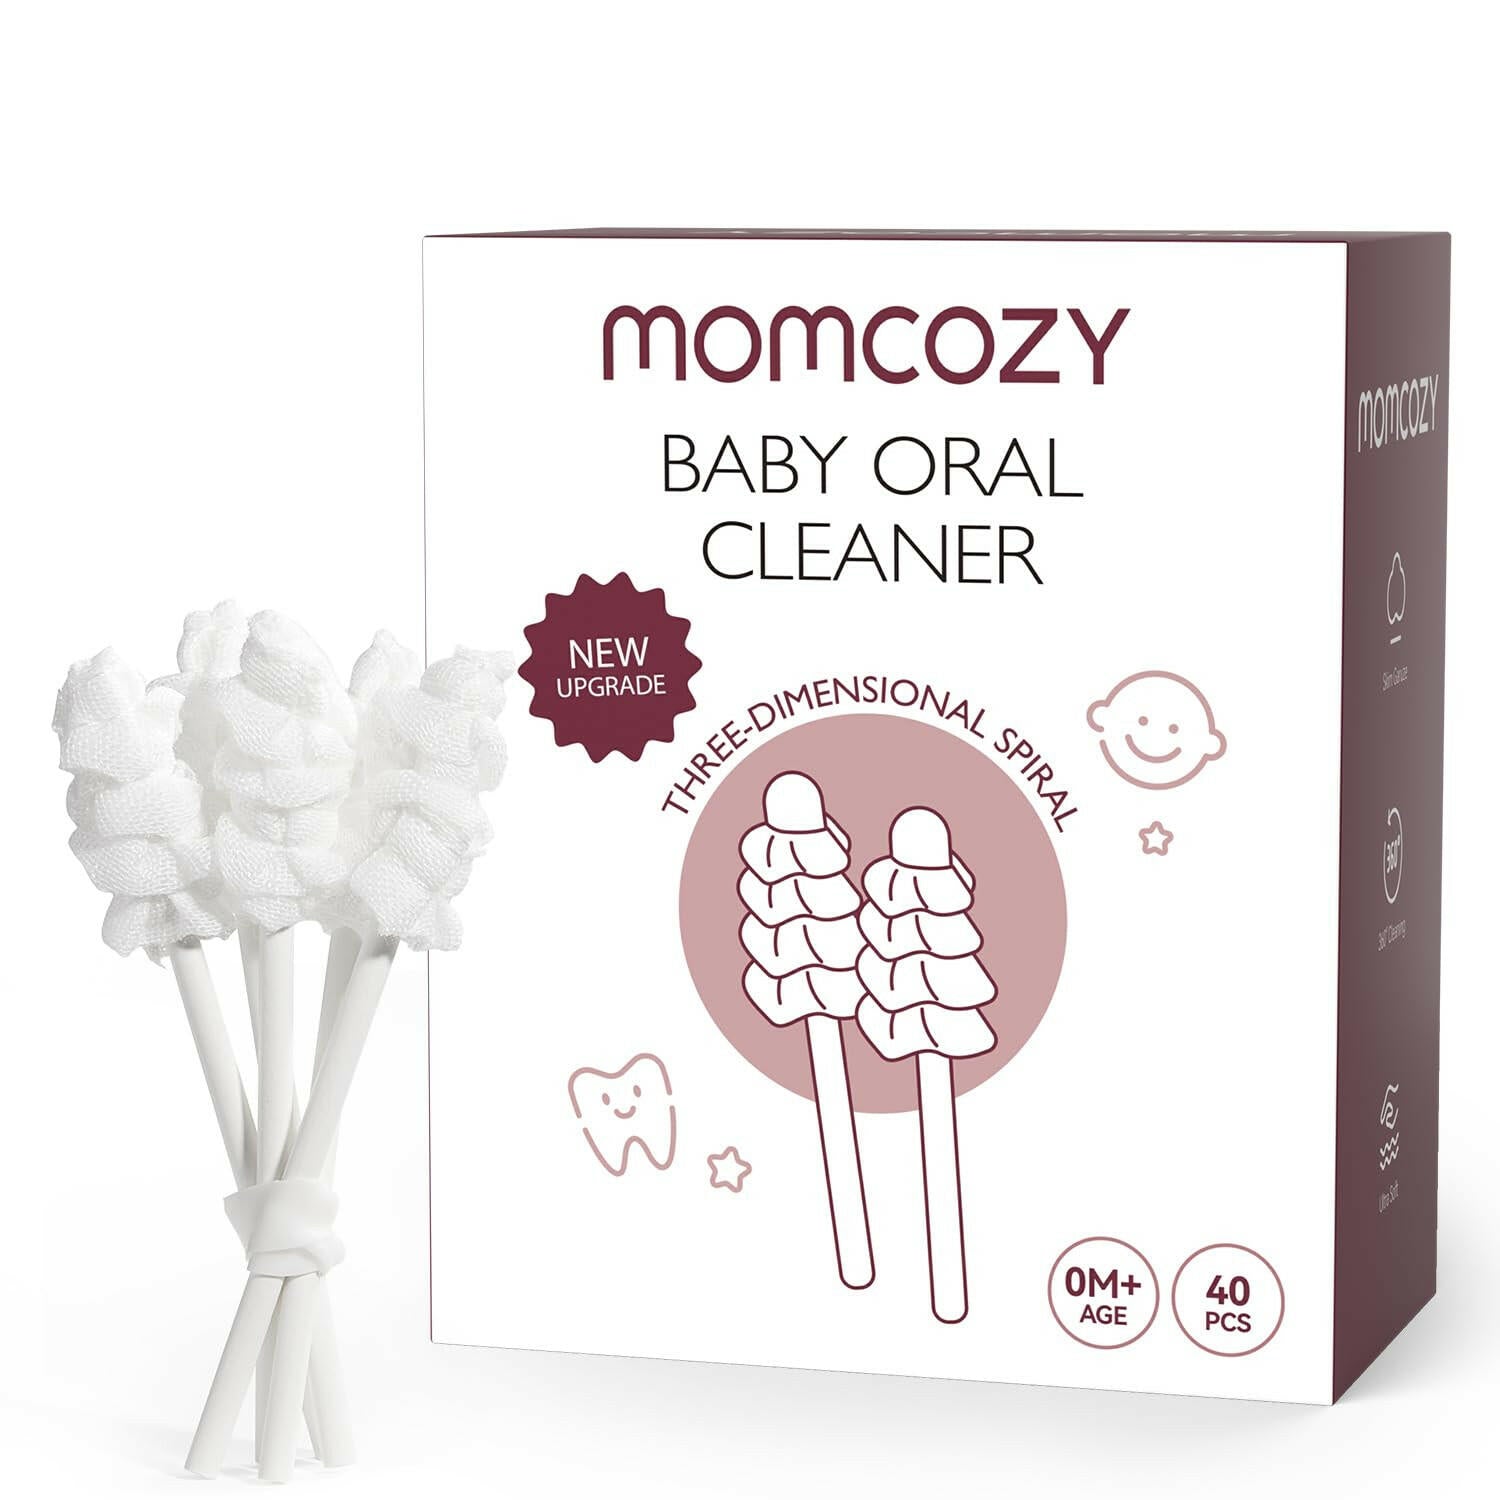 Momcozy Baby Disposable Oral Cleaner, 40 pcs